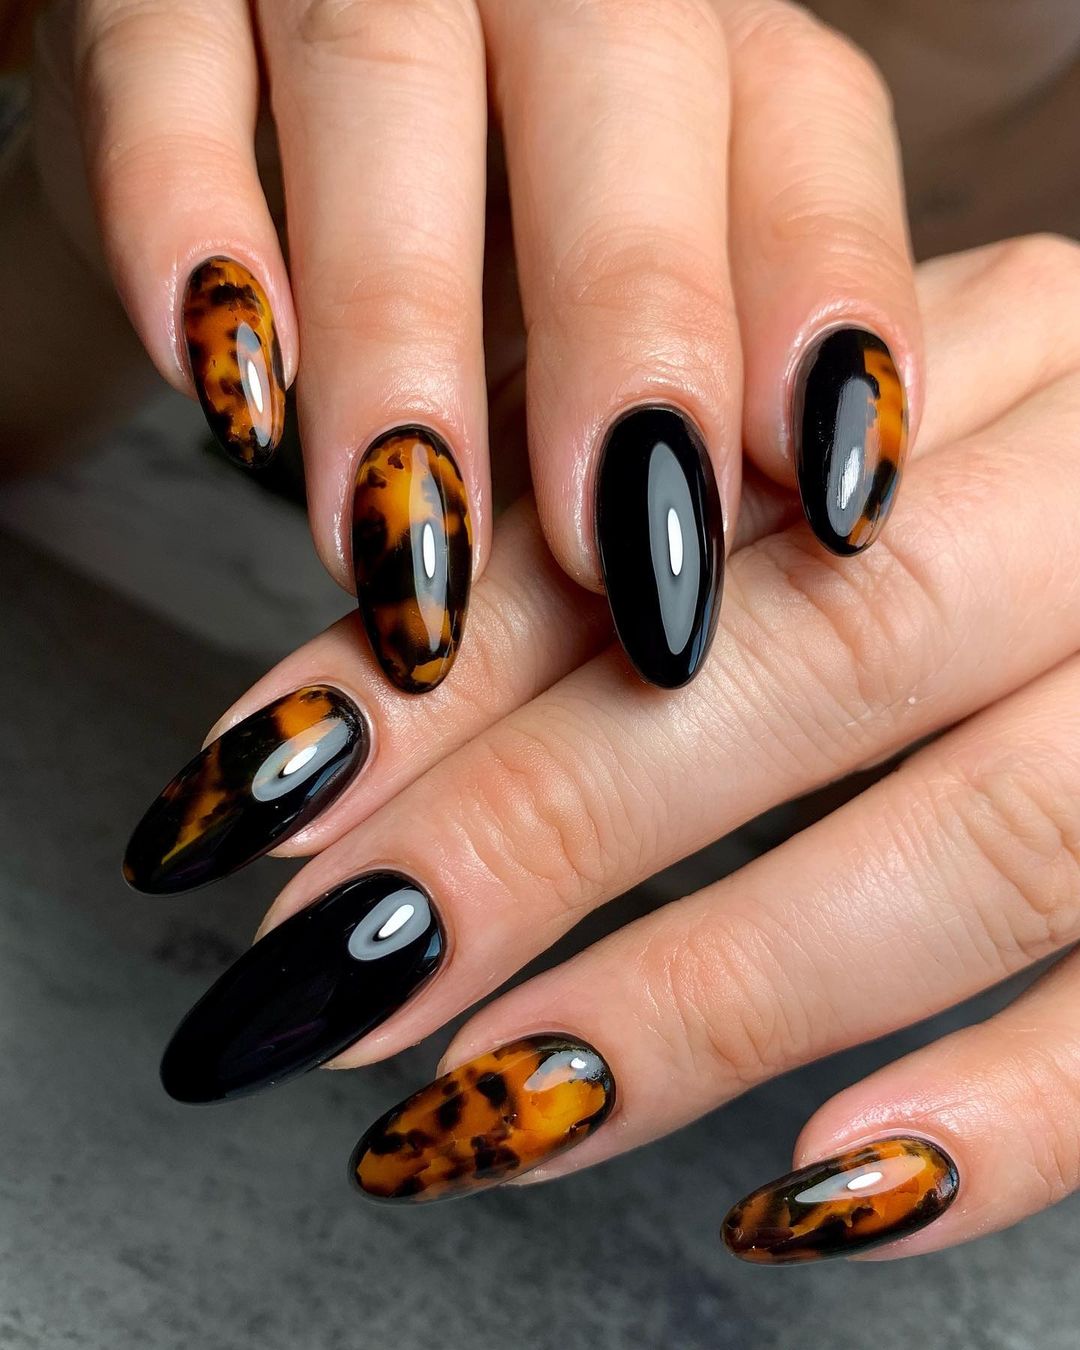 Nail art ideas: 17 easy and on-trend designs to try - beautyheaven